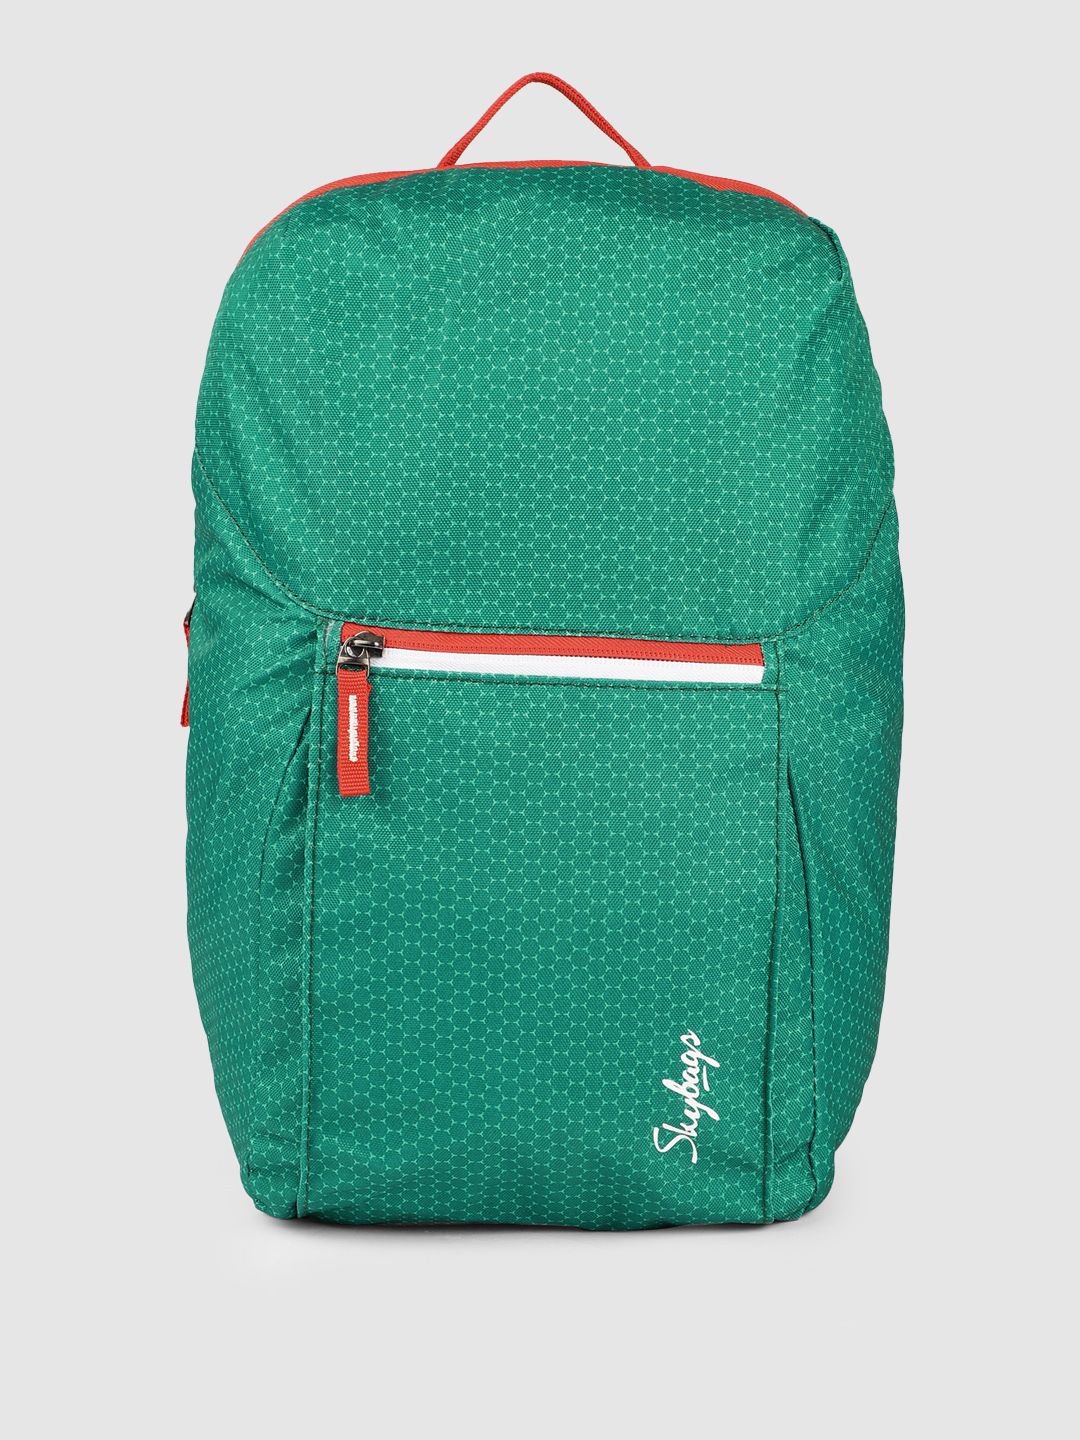 Skybags Unisex Green Backpack Price in India